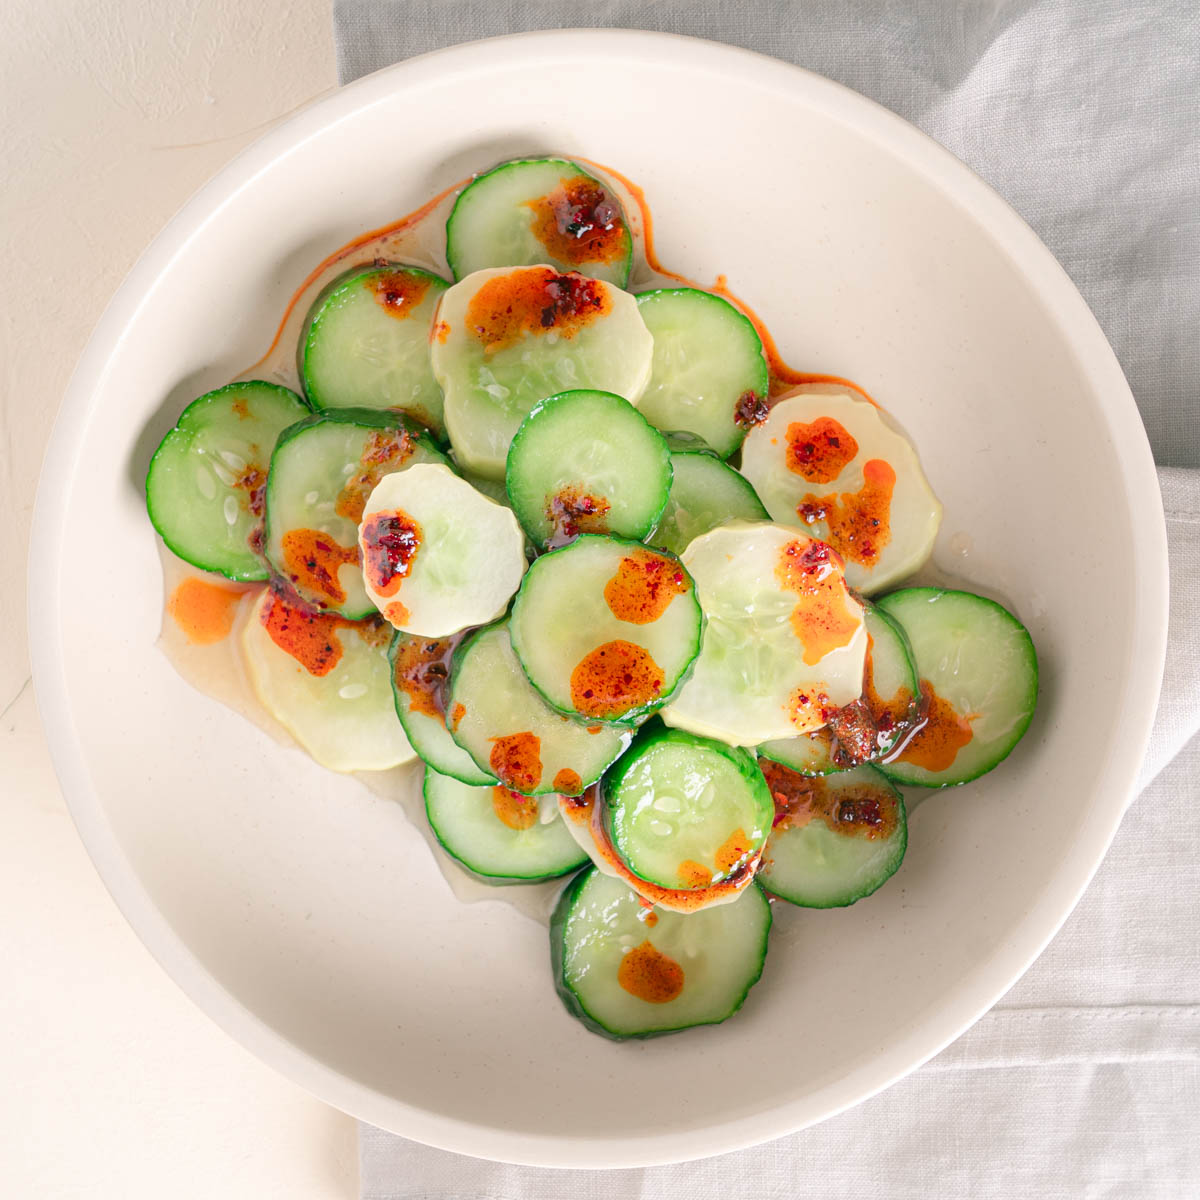 Cucumbers sliced and stacked in an off white bowl. The cucumber salad has a glistening vinegar sauce with a drizzle of red chili oil over top.